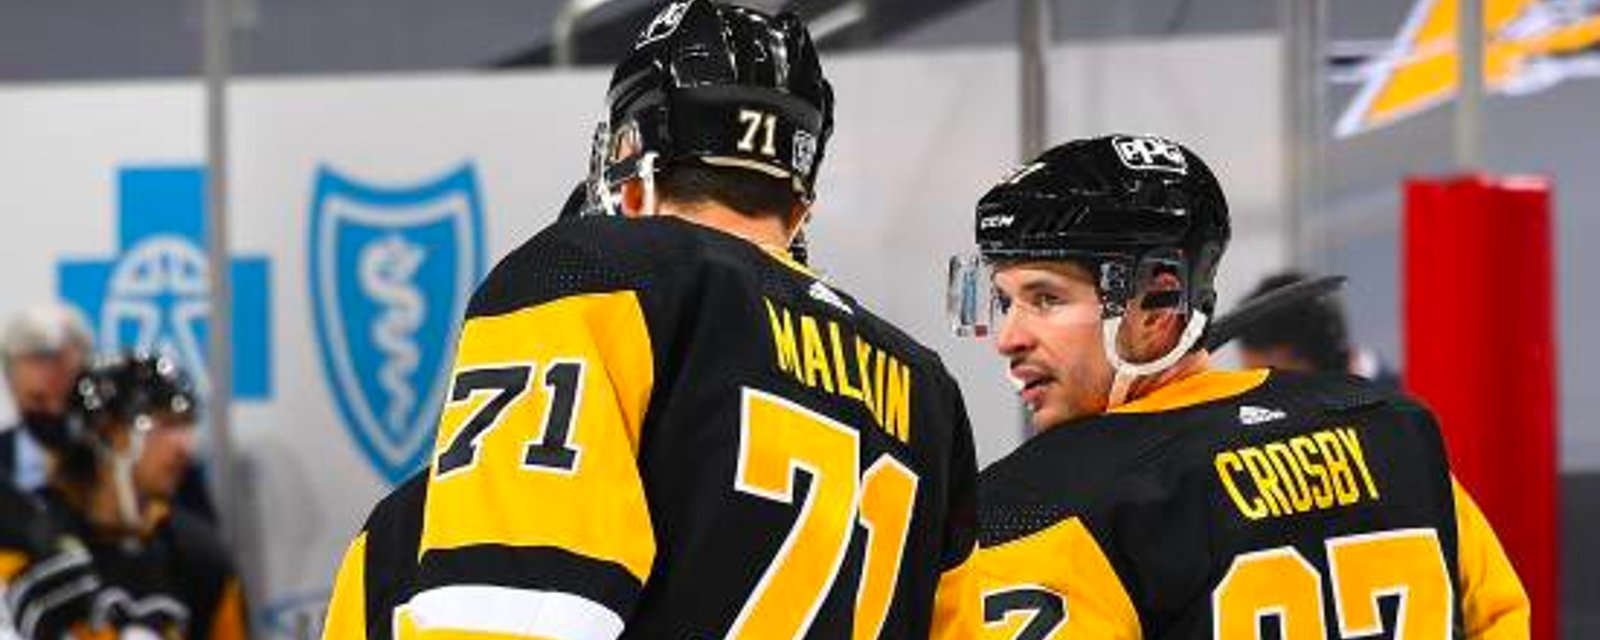 Talks of Crosby and Malkin getting offered to leave Pittsburgh arise 